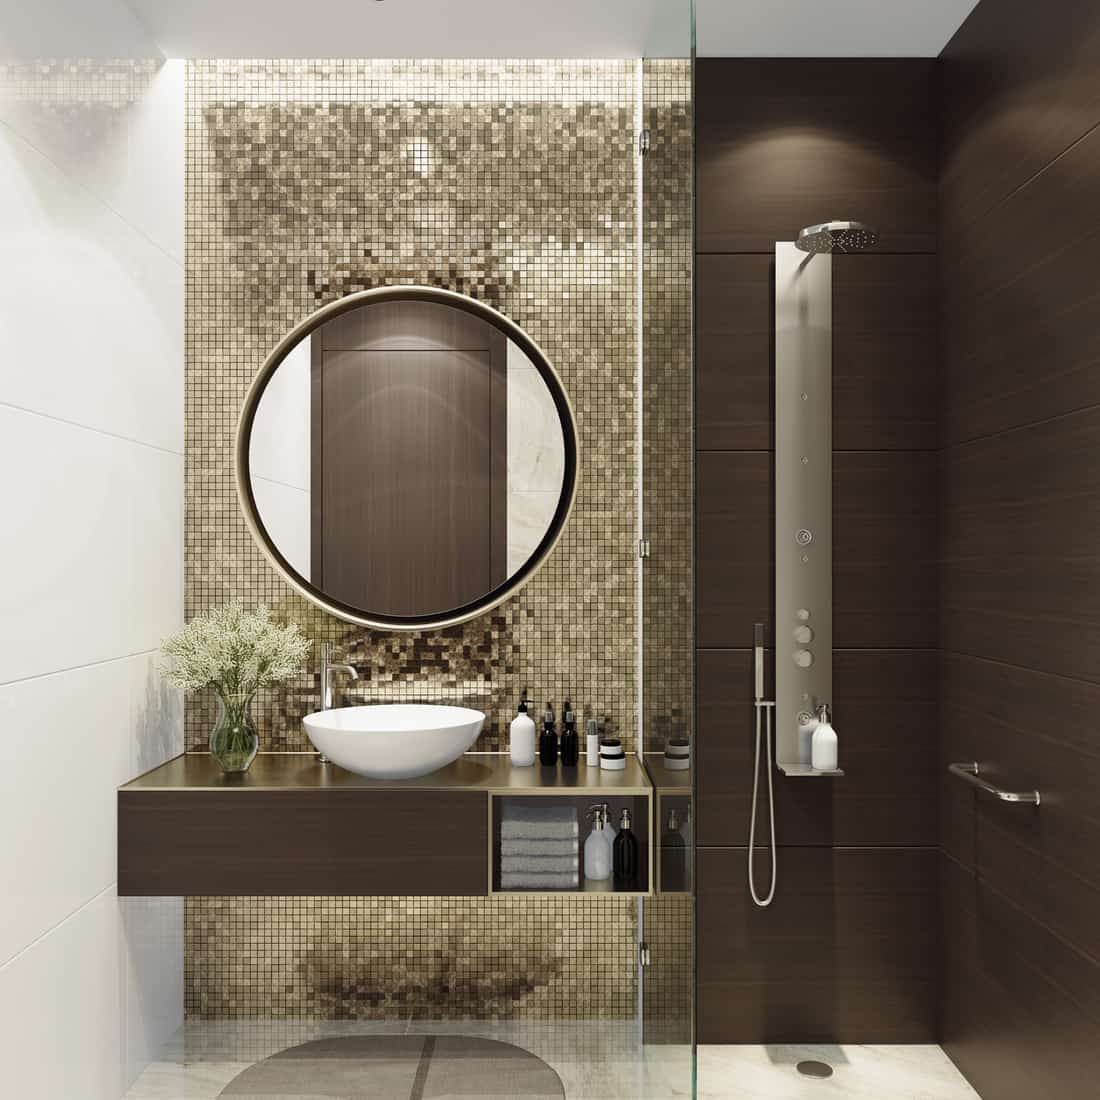 Luxurious bathroom with natural stone tiles and gold mosaic tiles. Round mirror. Small bathroom.